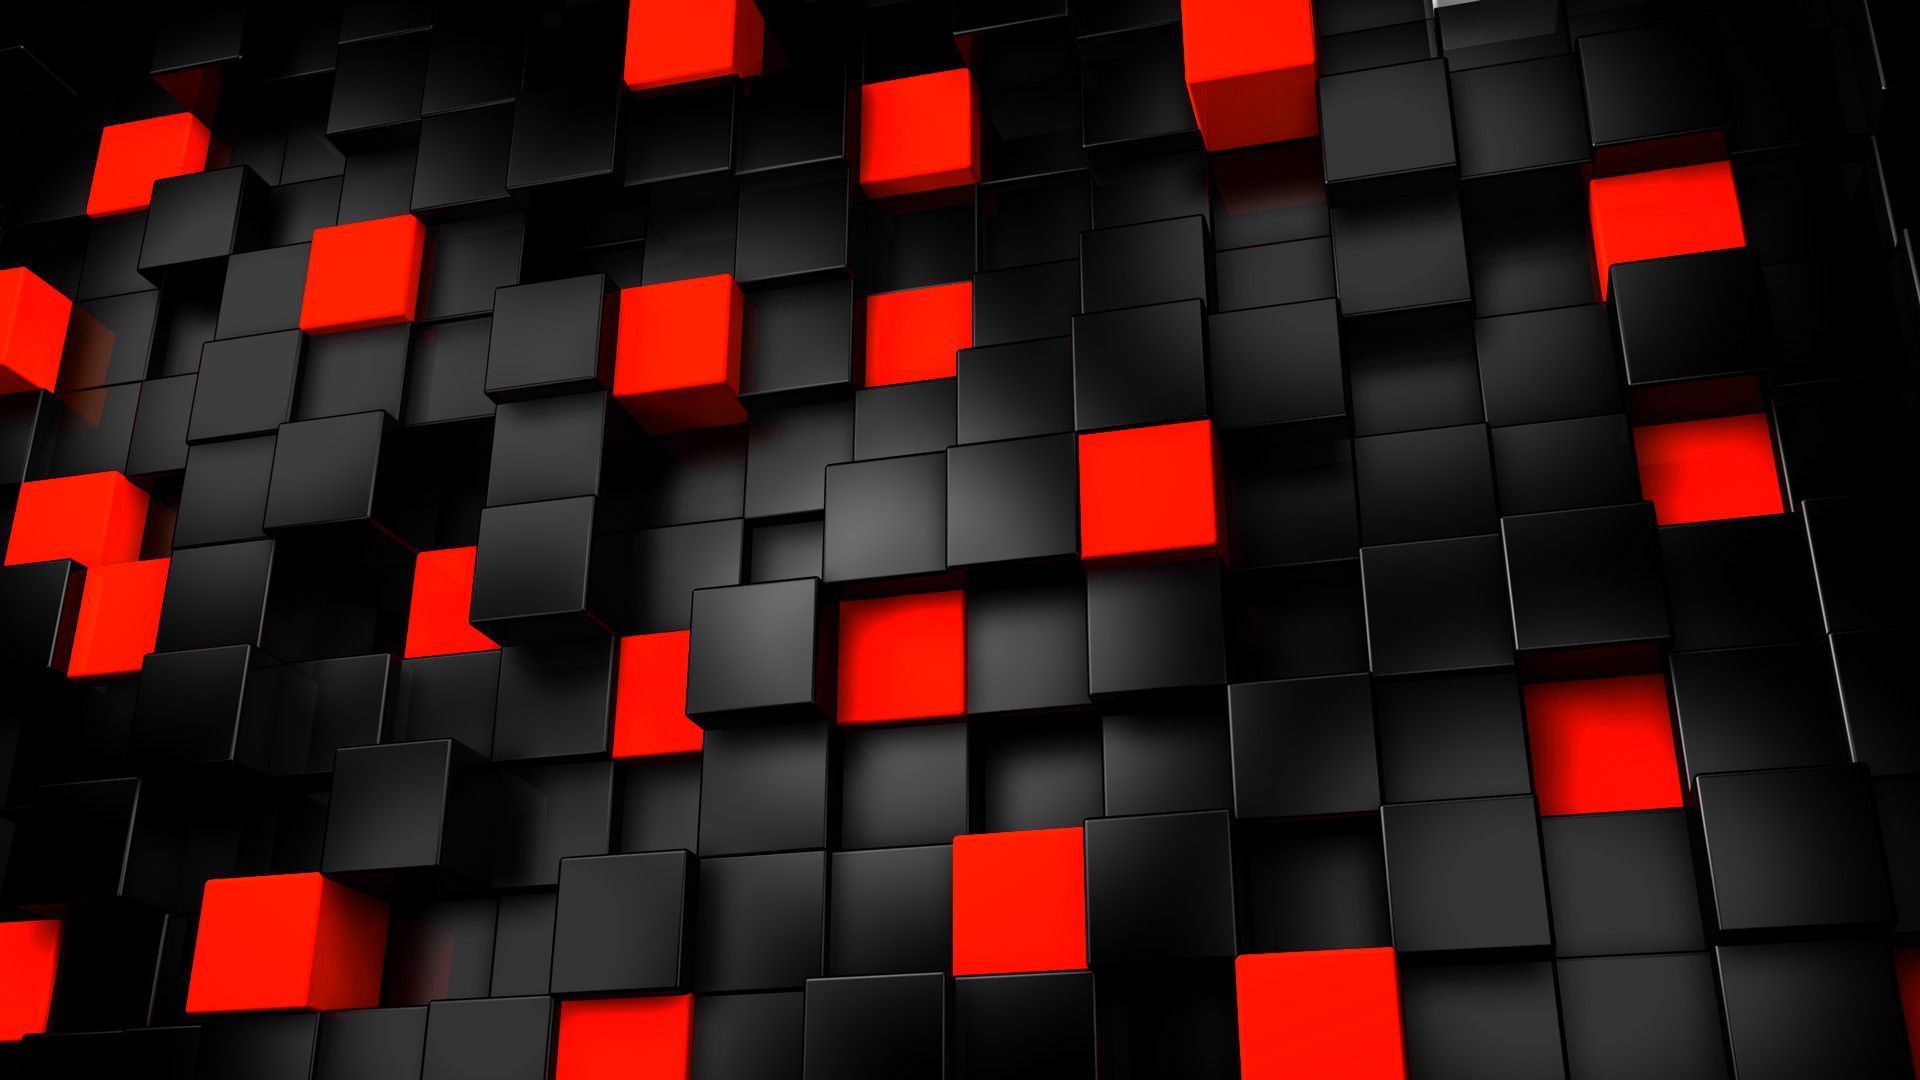 Black And Red Abstract Wallpaper 09 - [1920x1080]